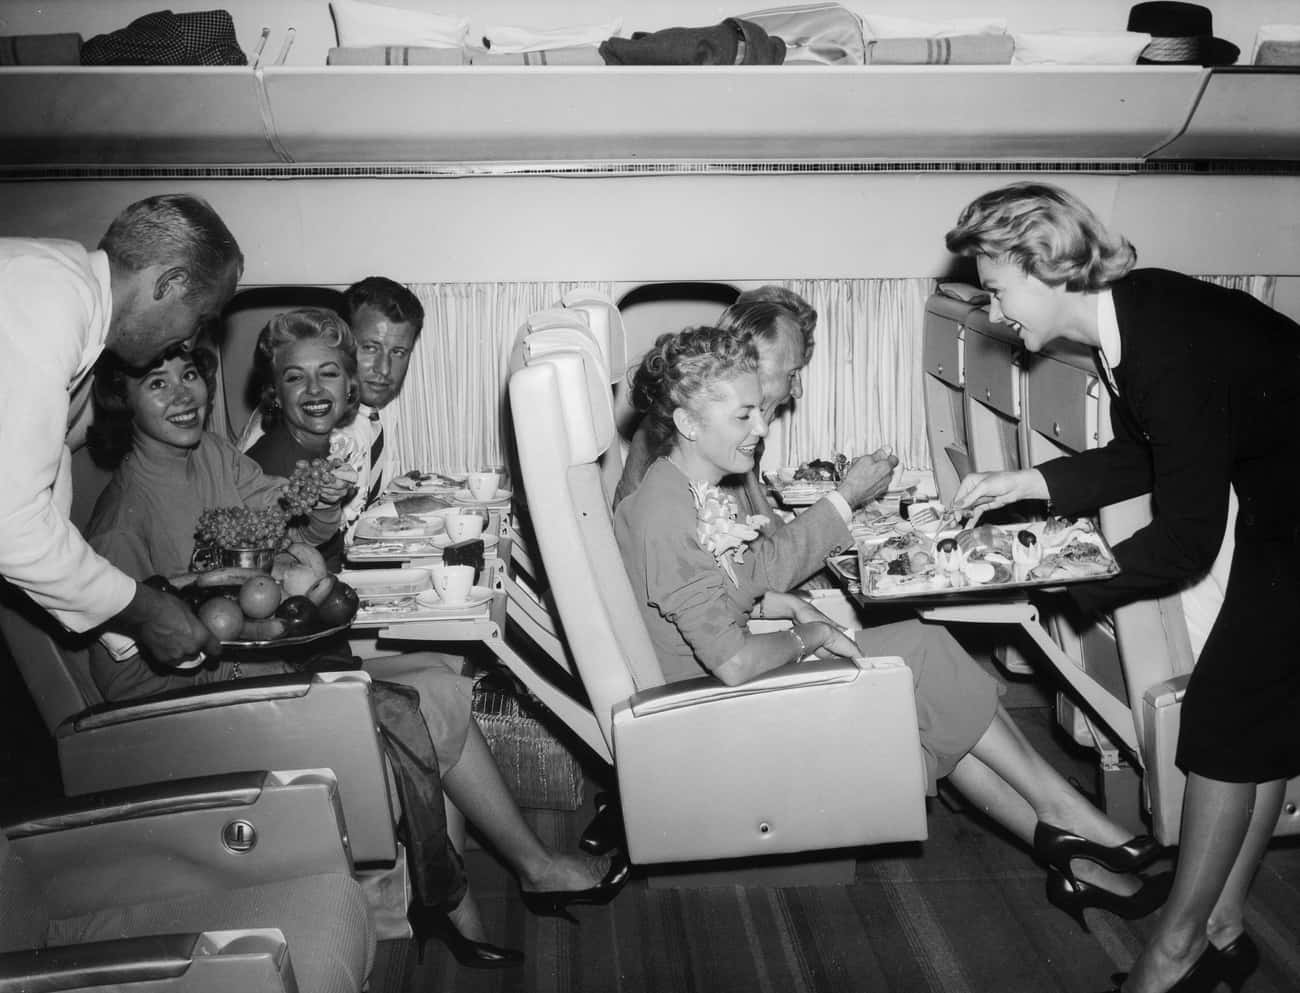 Planes Featured Larger Seats With More Legroom